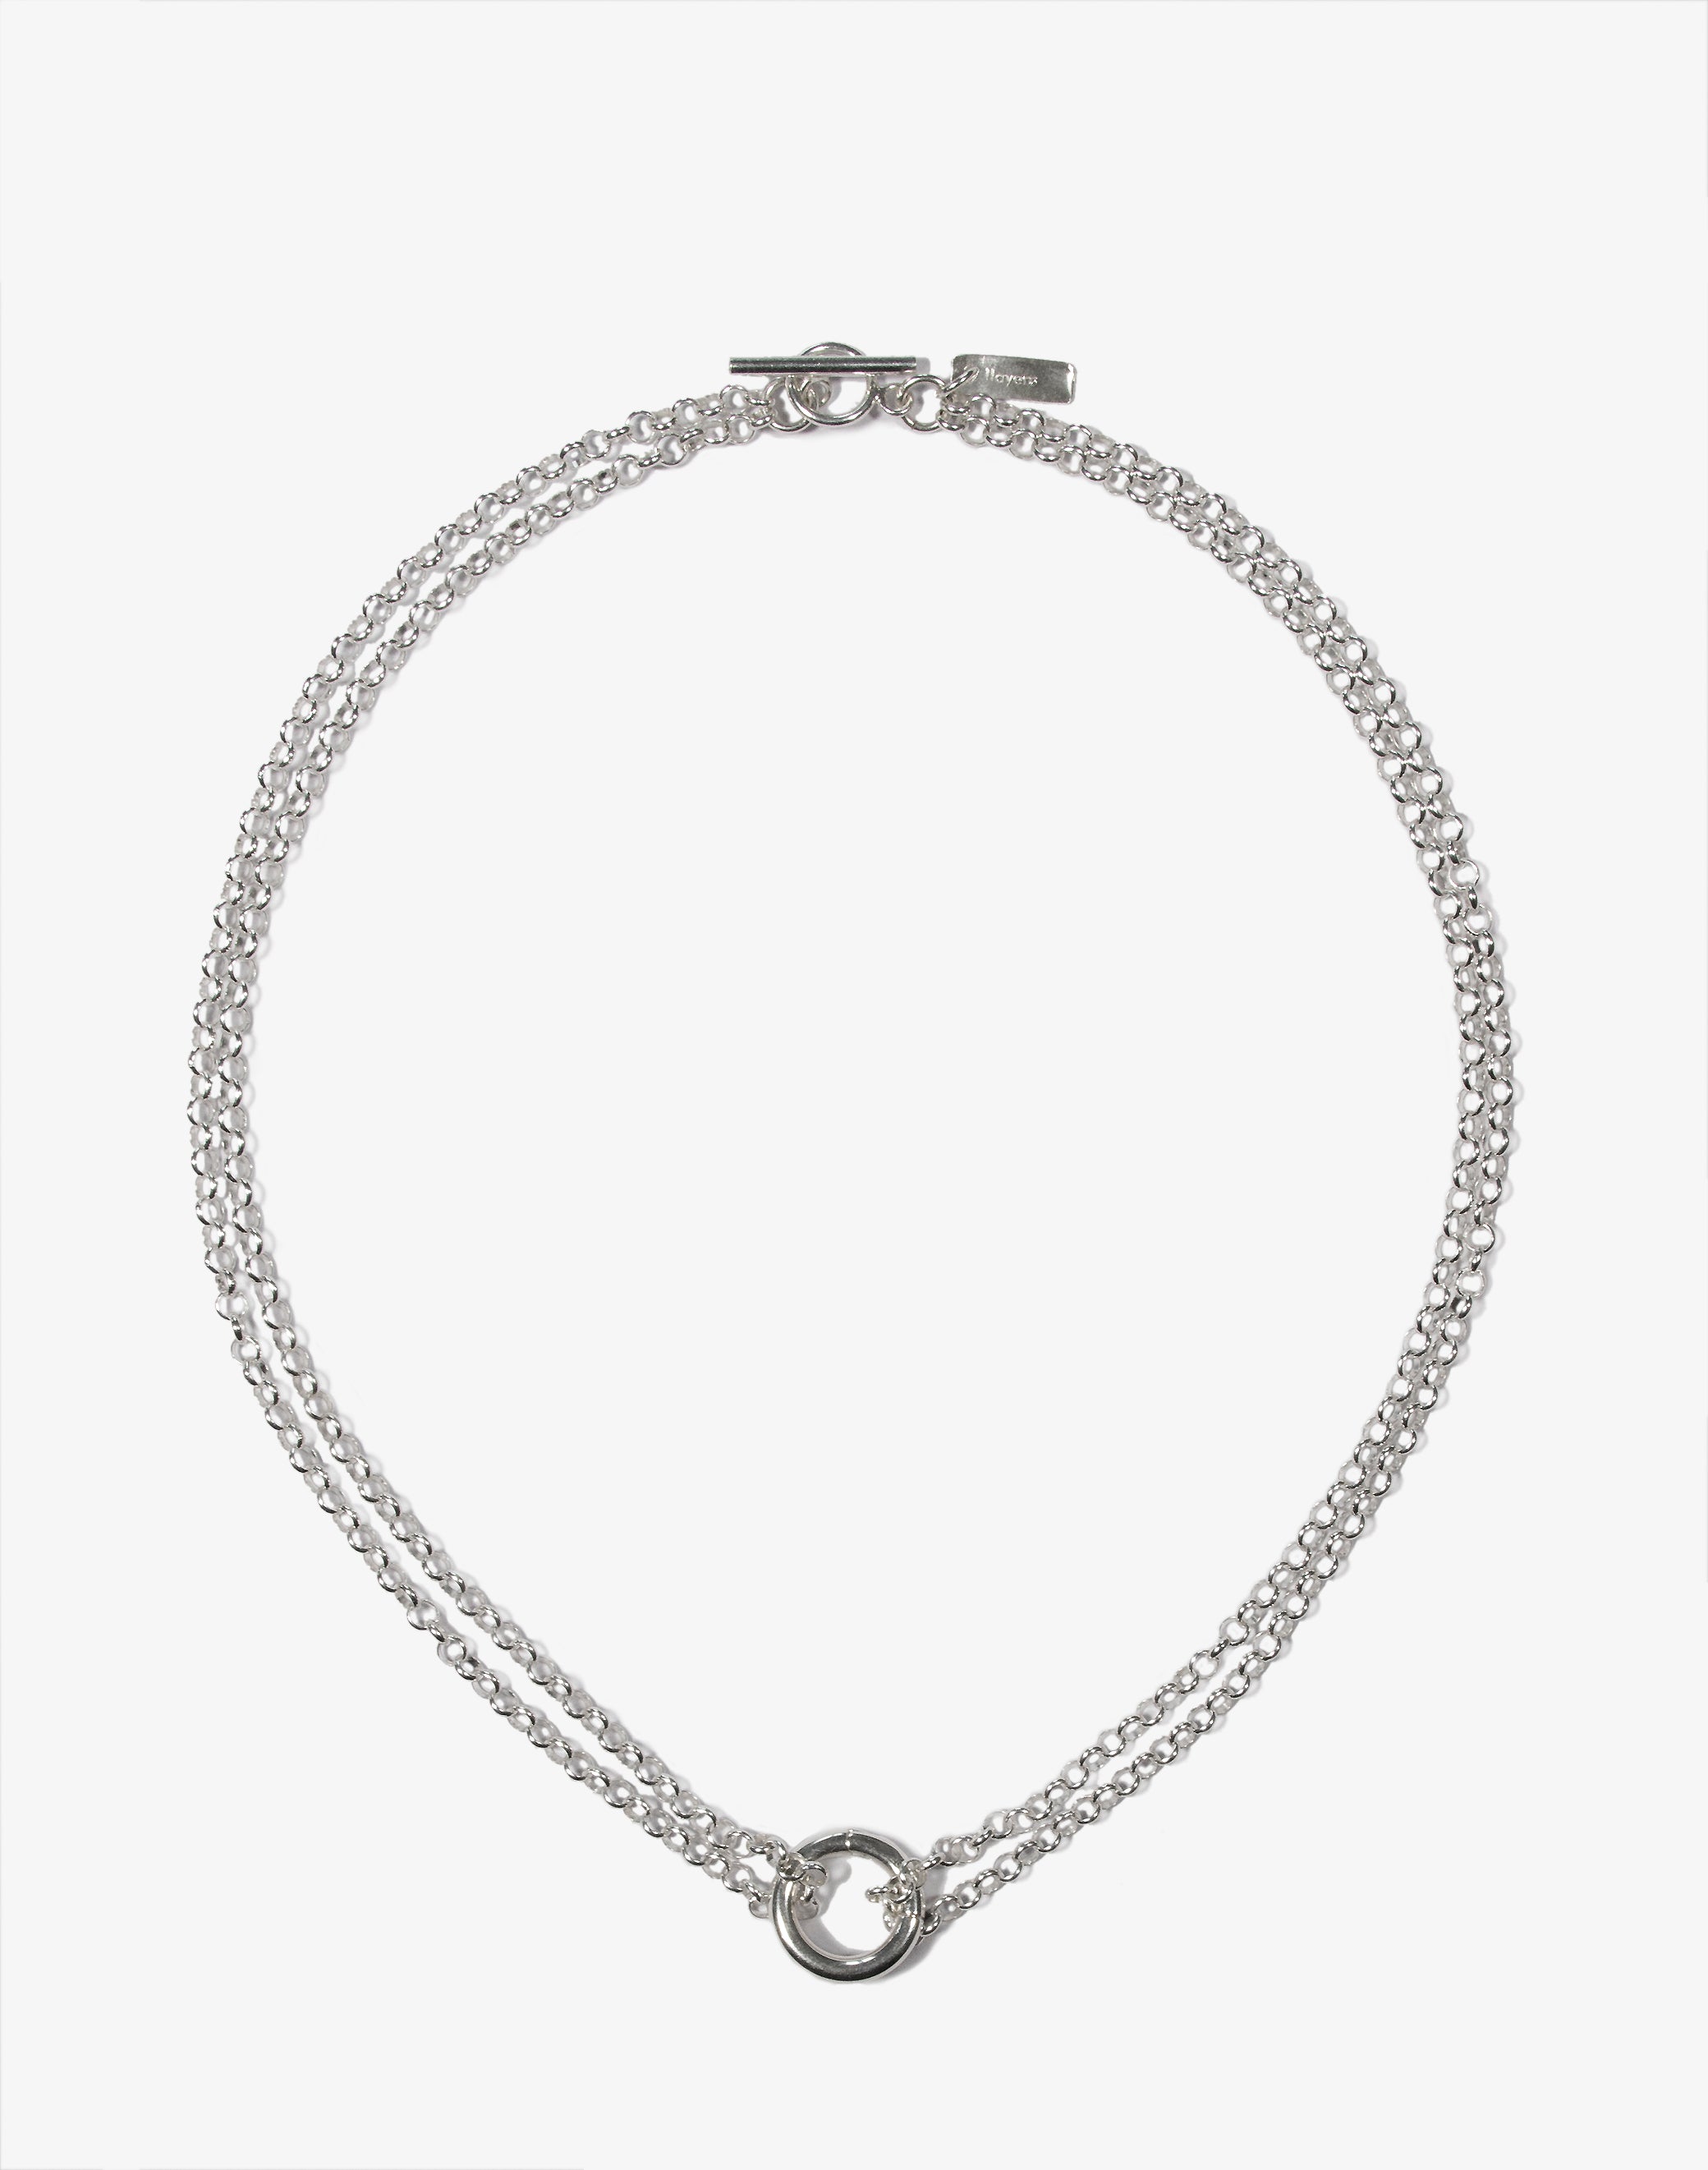 llayers jewelry unite Women silver chain rings choker necklace - Made In Brookyn New York 2